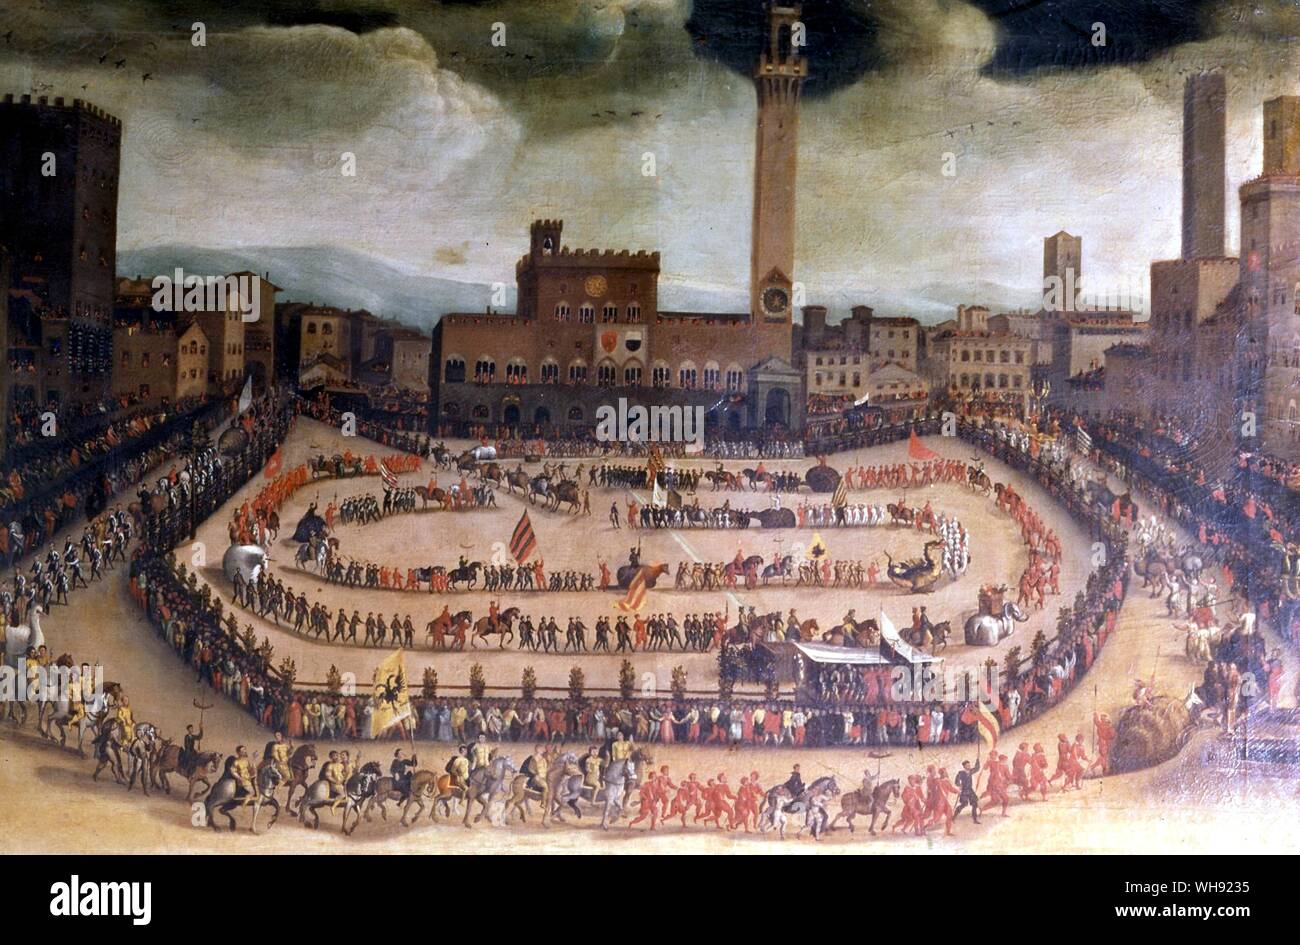 The Procession before the Palio - 1546. by Lorenzo Fratellini. Copy from the original by anon. artist. Azienda Auto-noma di Turismo Siena. Palio is the name given in Italy to an annual athletic contest, very often of a historical character, pitting the neighbourhoods of a town or the hamlets of a comune against each other. Typically they are fought in costume and commemorate some event or tradition of the Middle Ages, and thus often involve horse racing, archery, jousting, crossbow shooting, and similar medieval sports. Once purely a matter of local rivalries, many have now become events Stock Photo